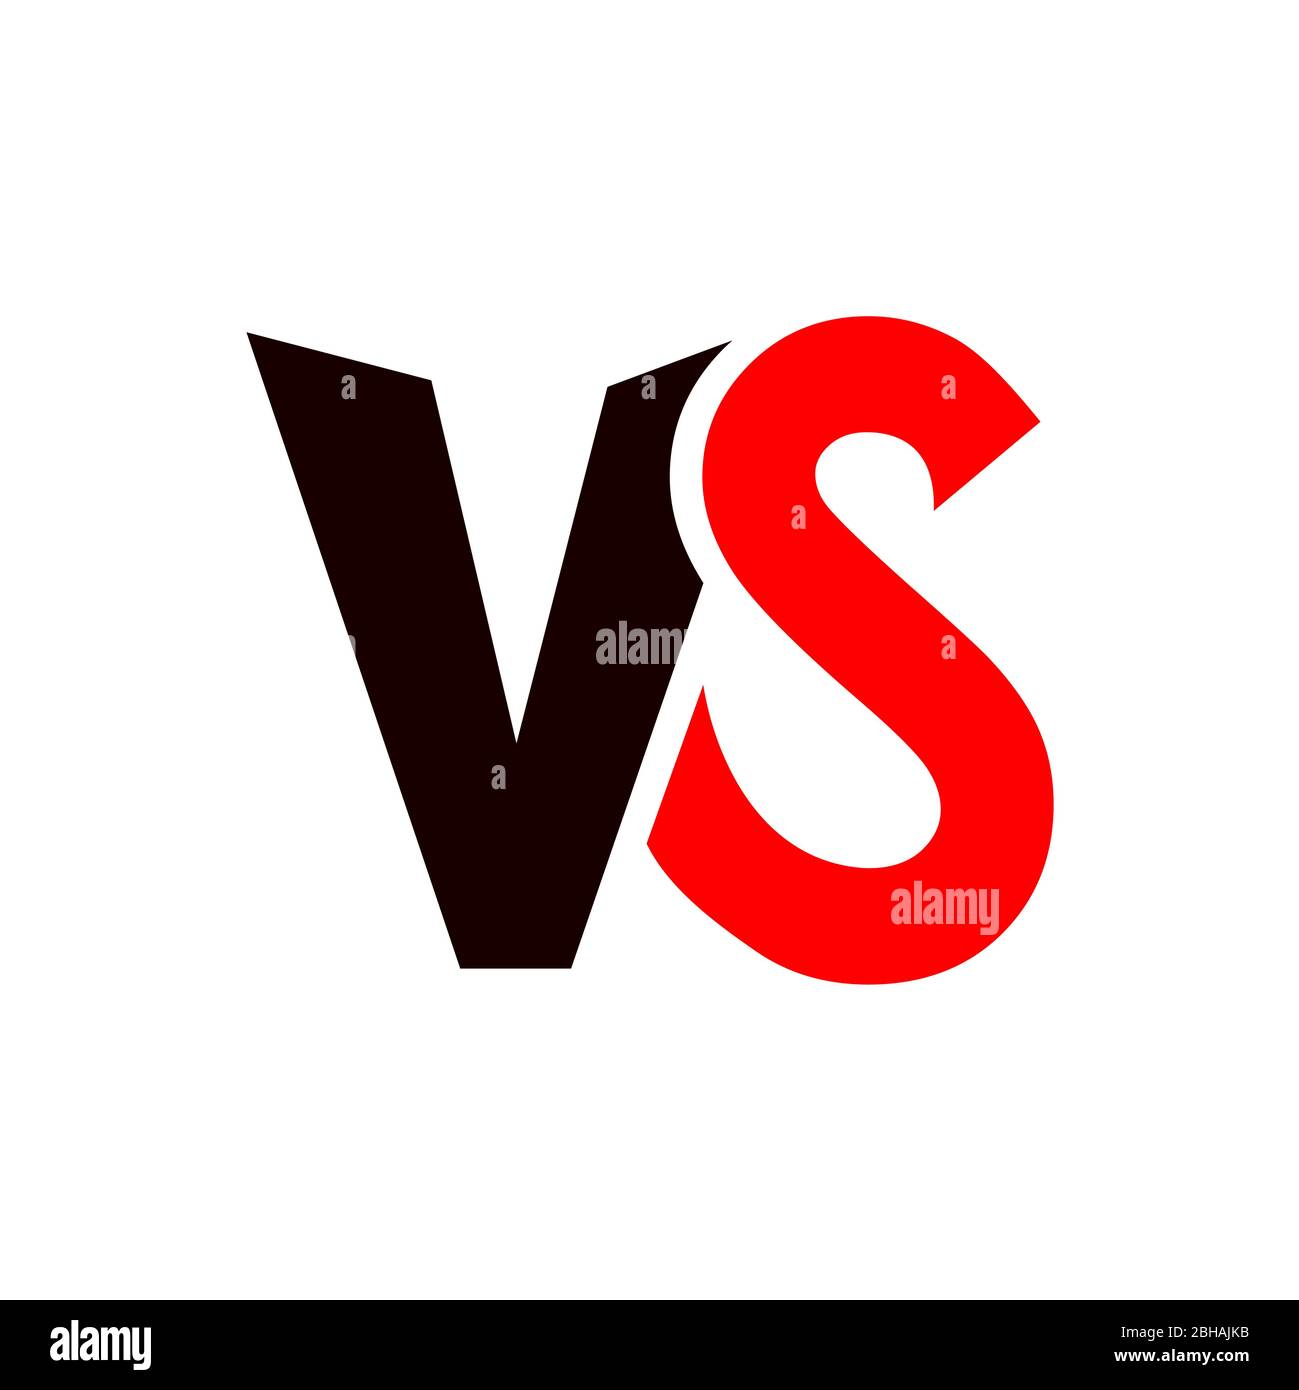 Versus VS icon letters fight Vector illustration on white background in flat style design with halftone Stock Vector